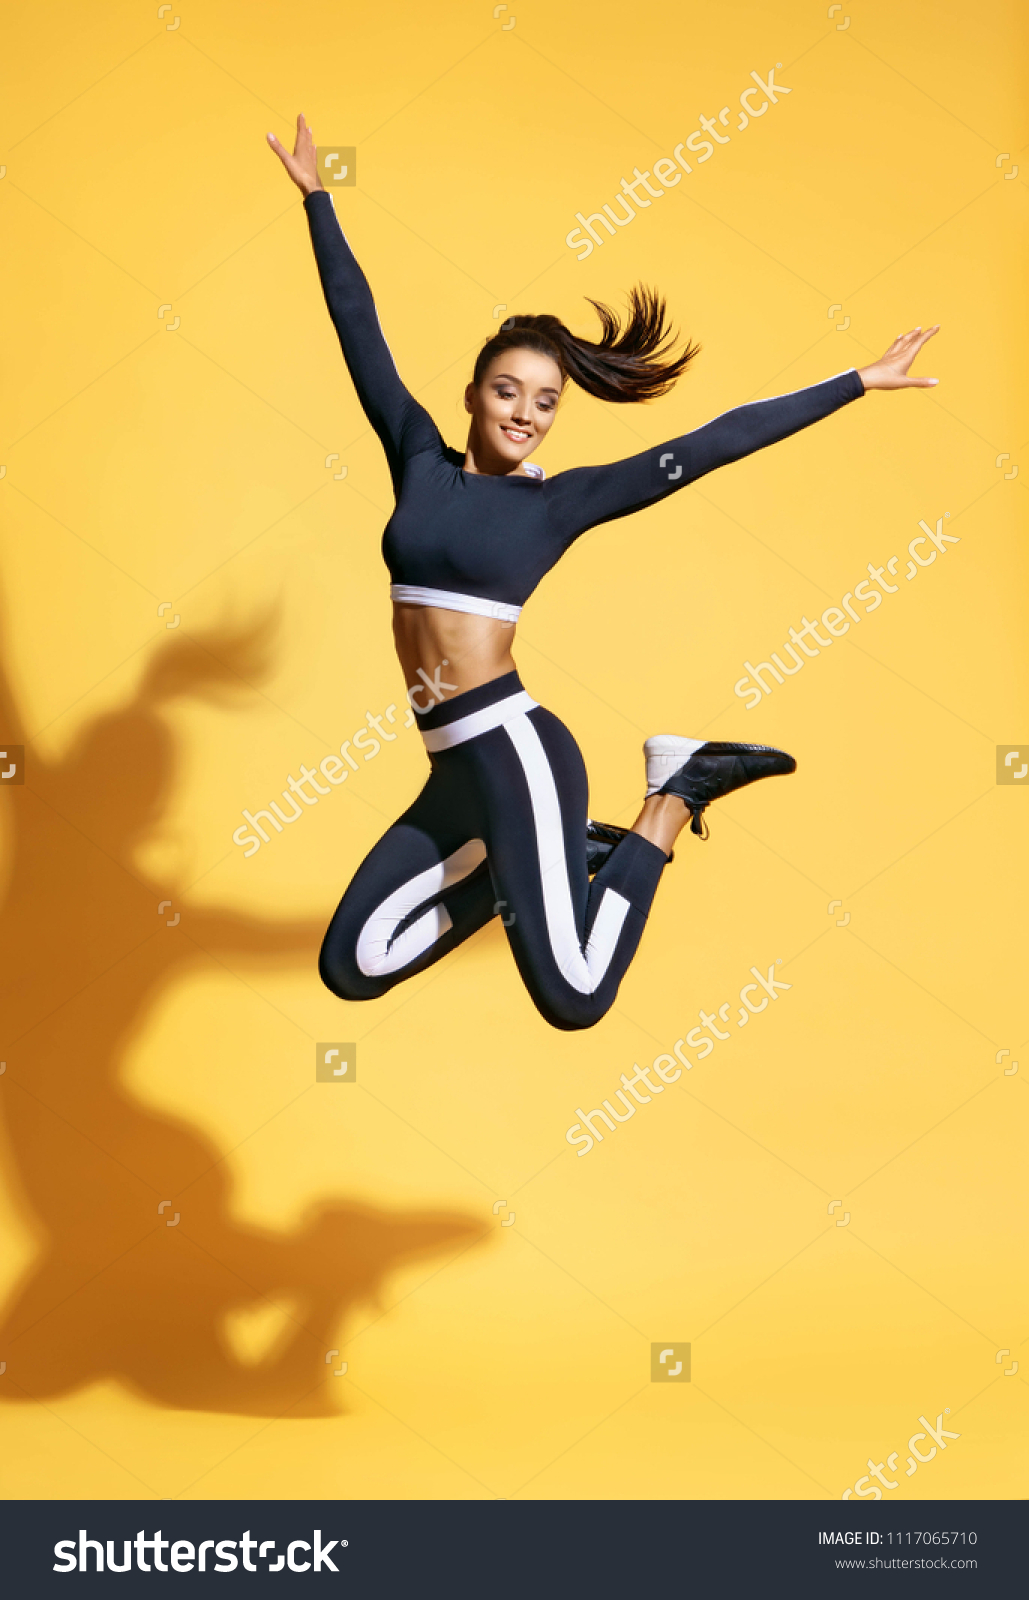 Sporty smiling woman jumping up in silhouette on yellow background. Dynamic movement. Sport and healthy lifestyle #1117065710